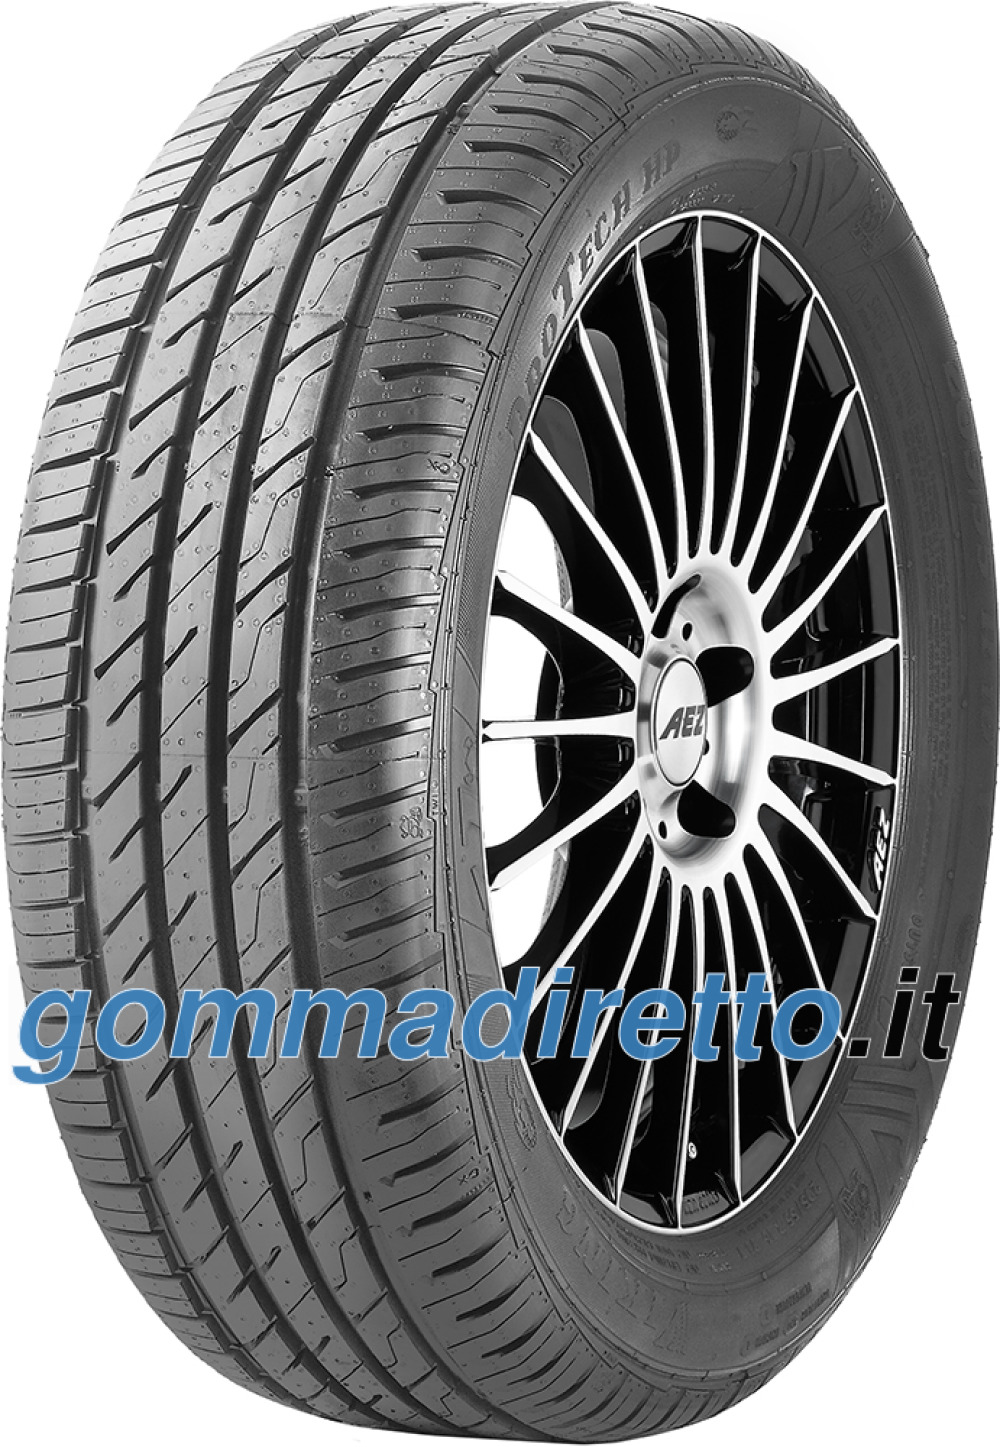 Image of Viking ProTech HP ( 245/40 R17 91Y )